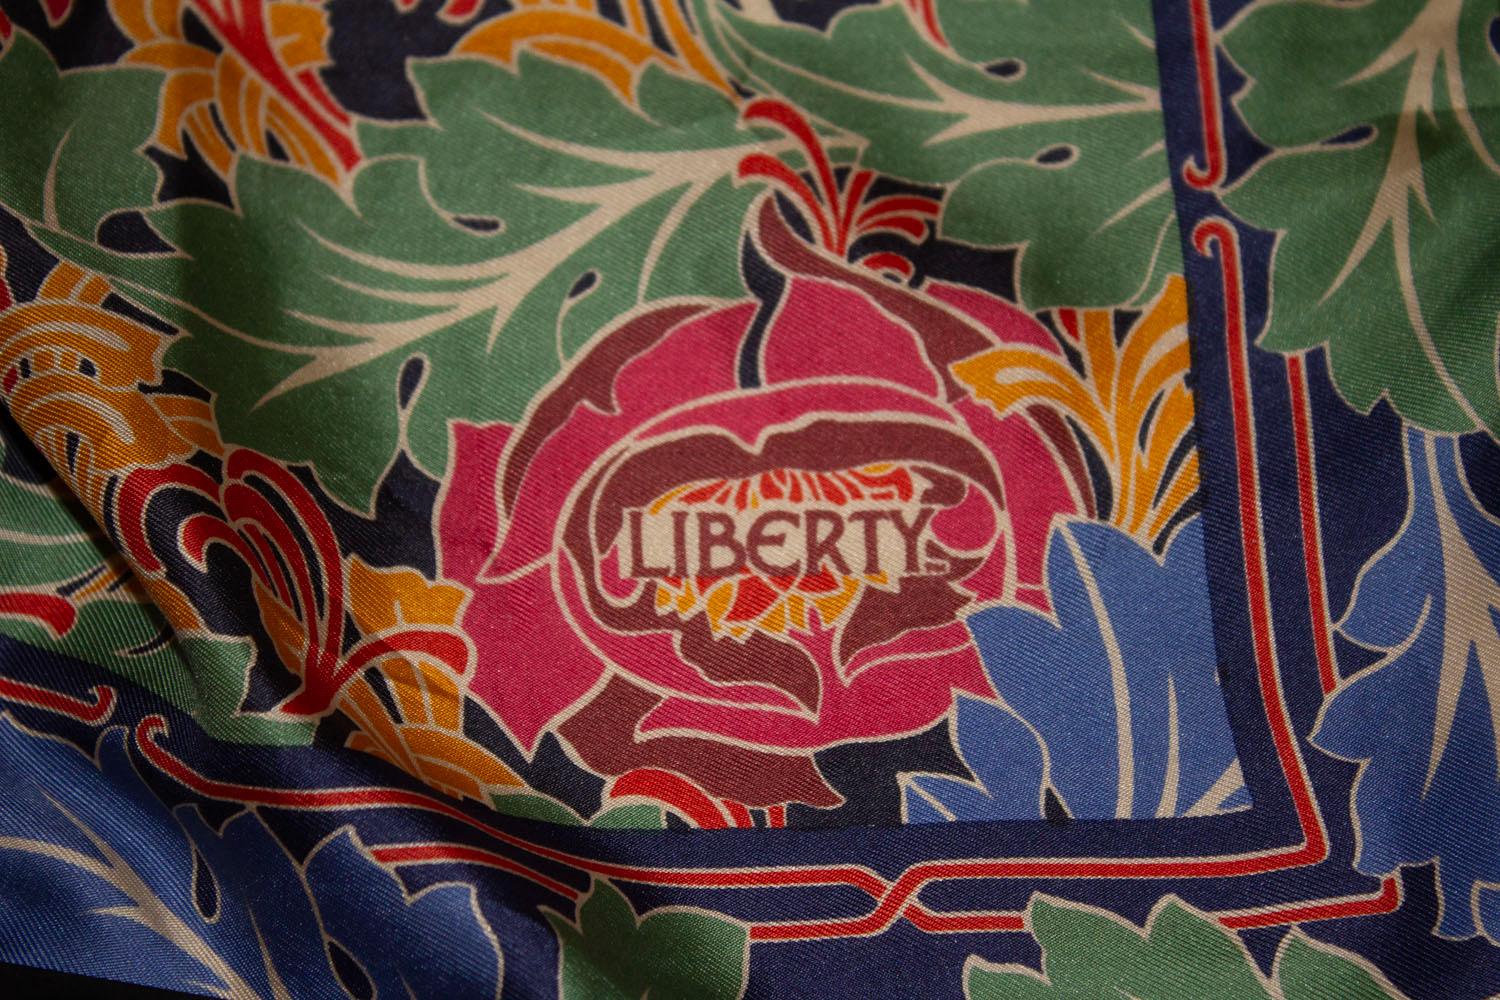 A stunning vintage silk scarf by Liberty of London. The scarf has a navy border with a colourful leaf print design. Colours include red, green, blue and red. Excellent condition. Measurements: 27'' x 27''